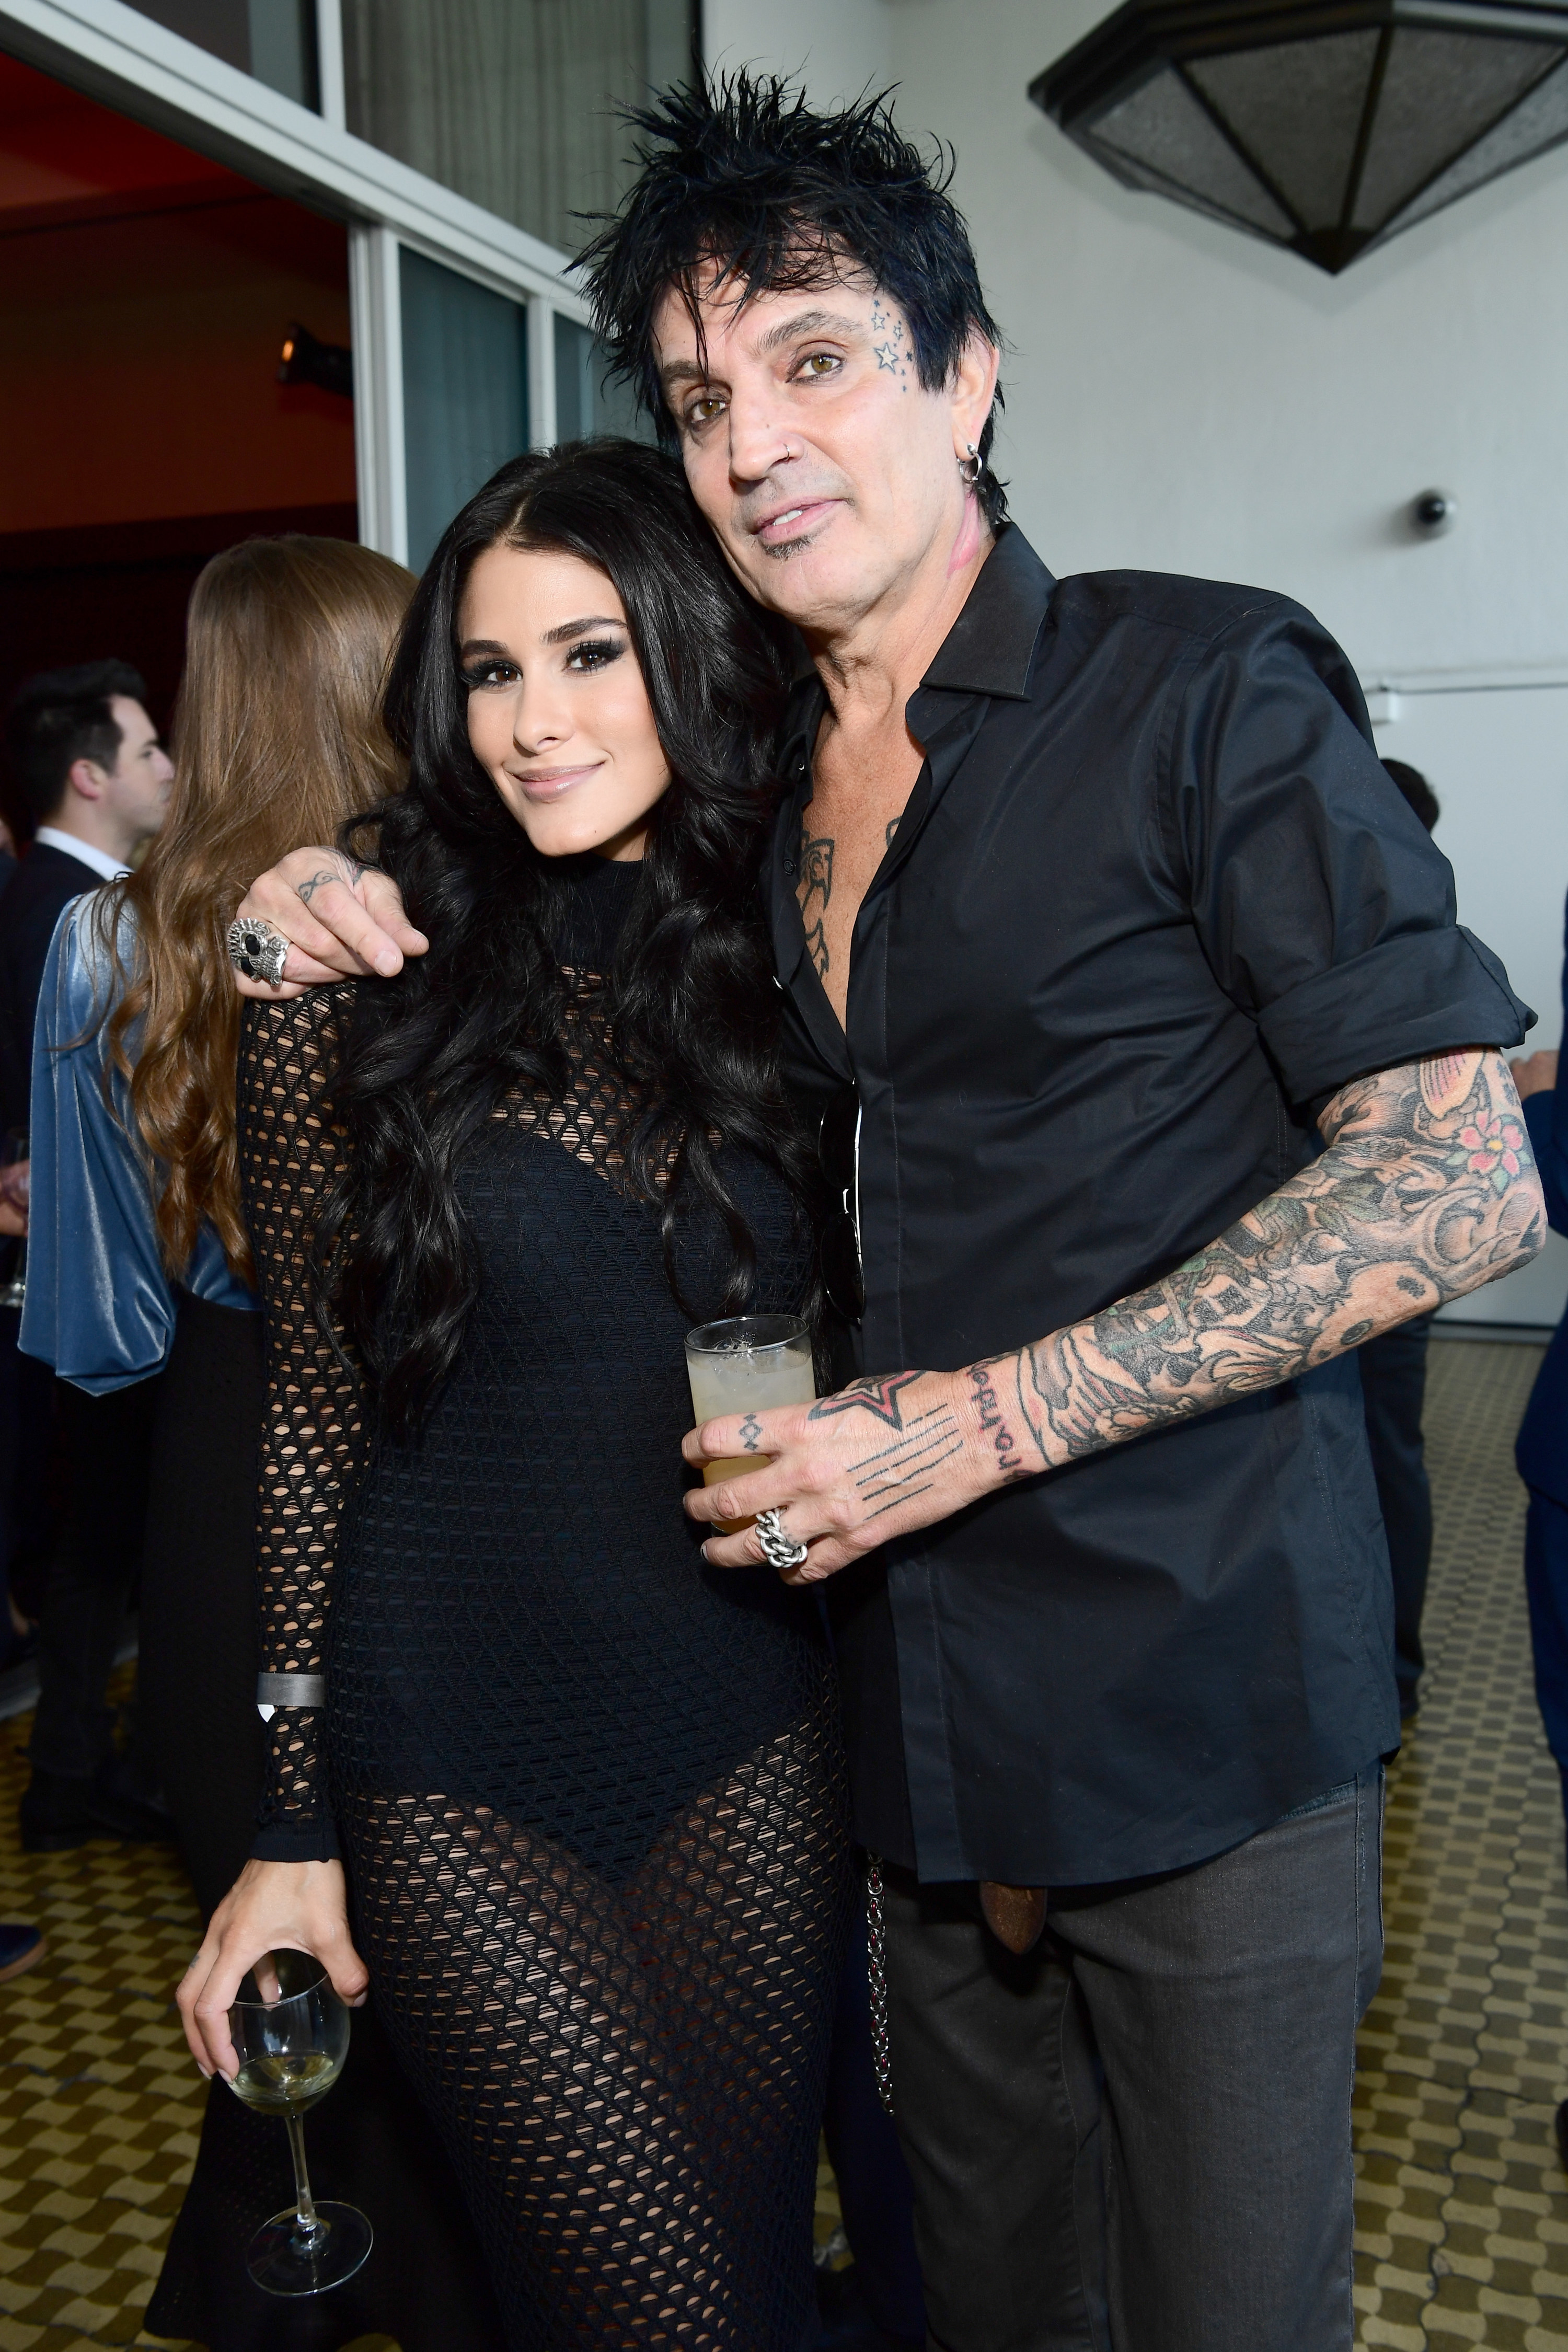 Brittany Furlan and Tommy Lee